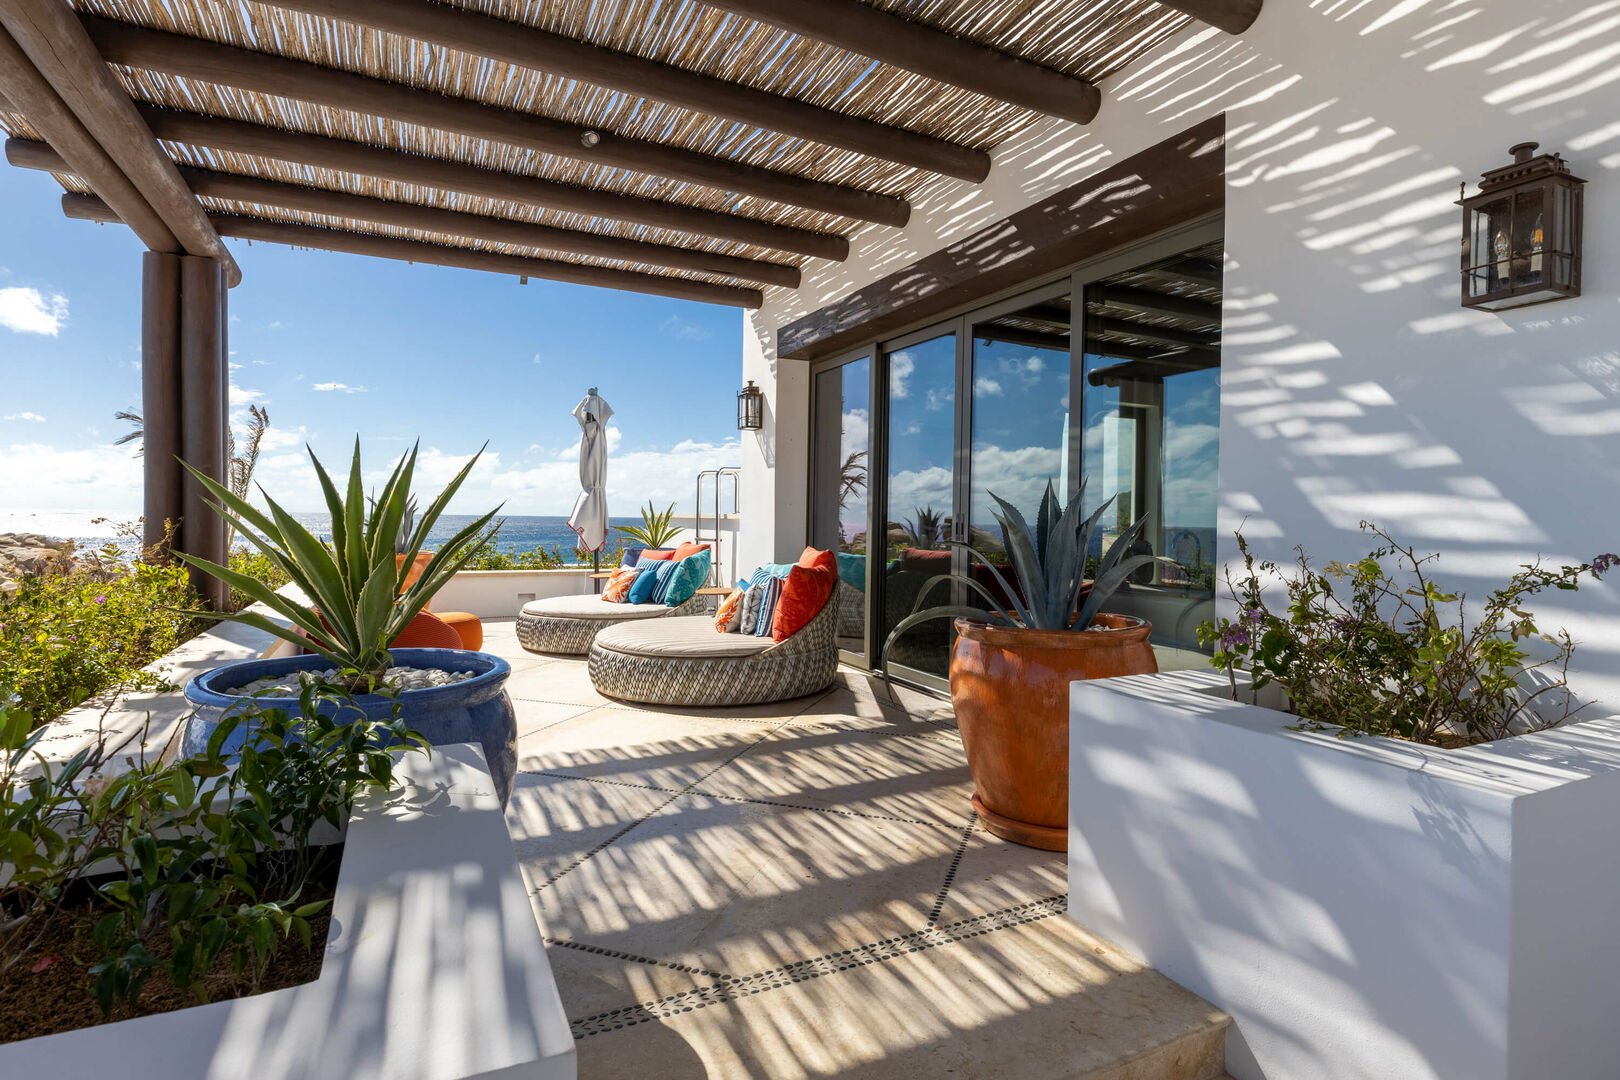 Comfortable chairs on one of the patios of this Los Cabos beachfront villa.